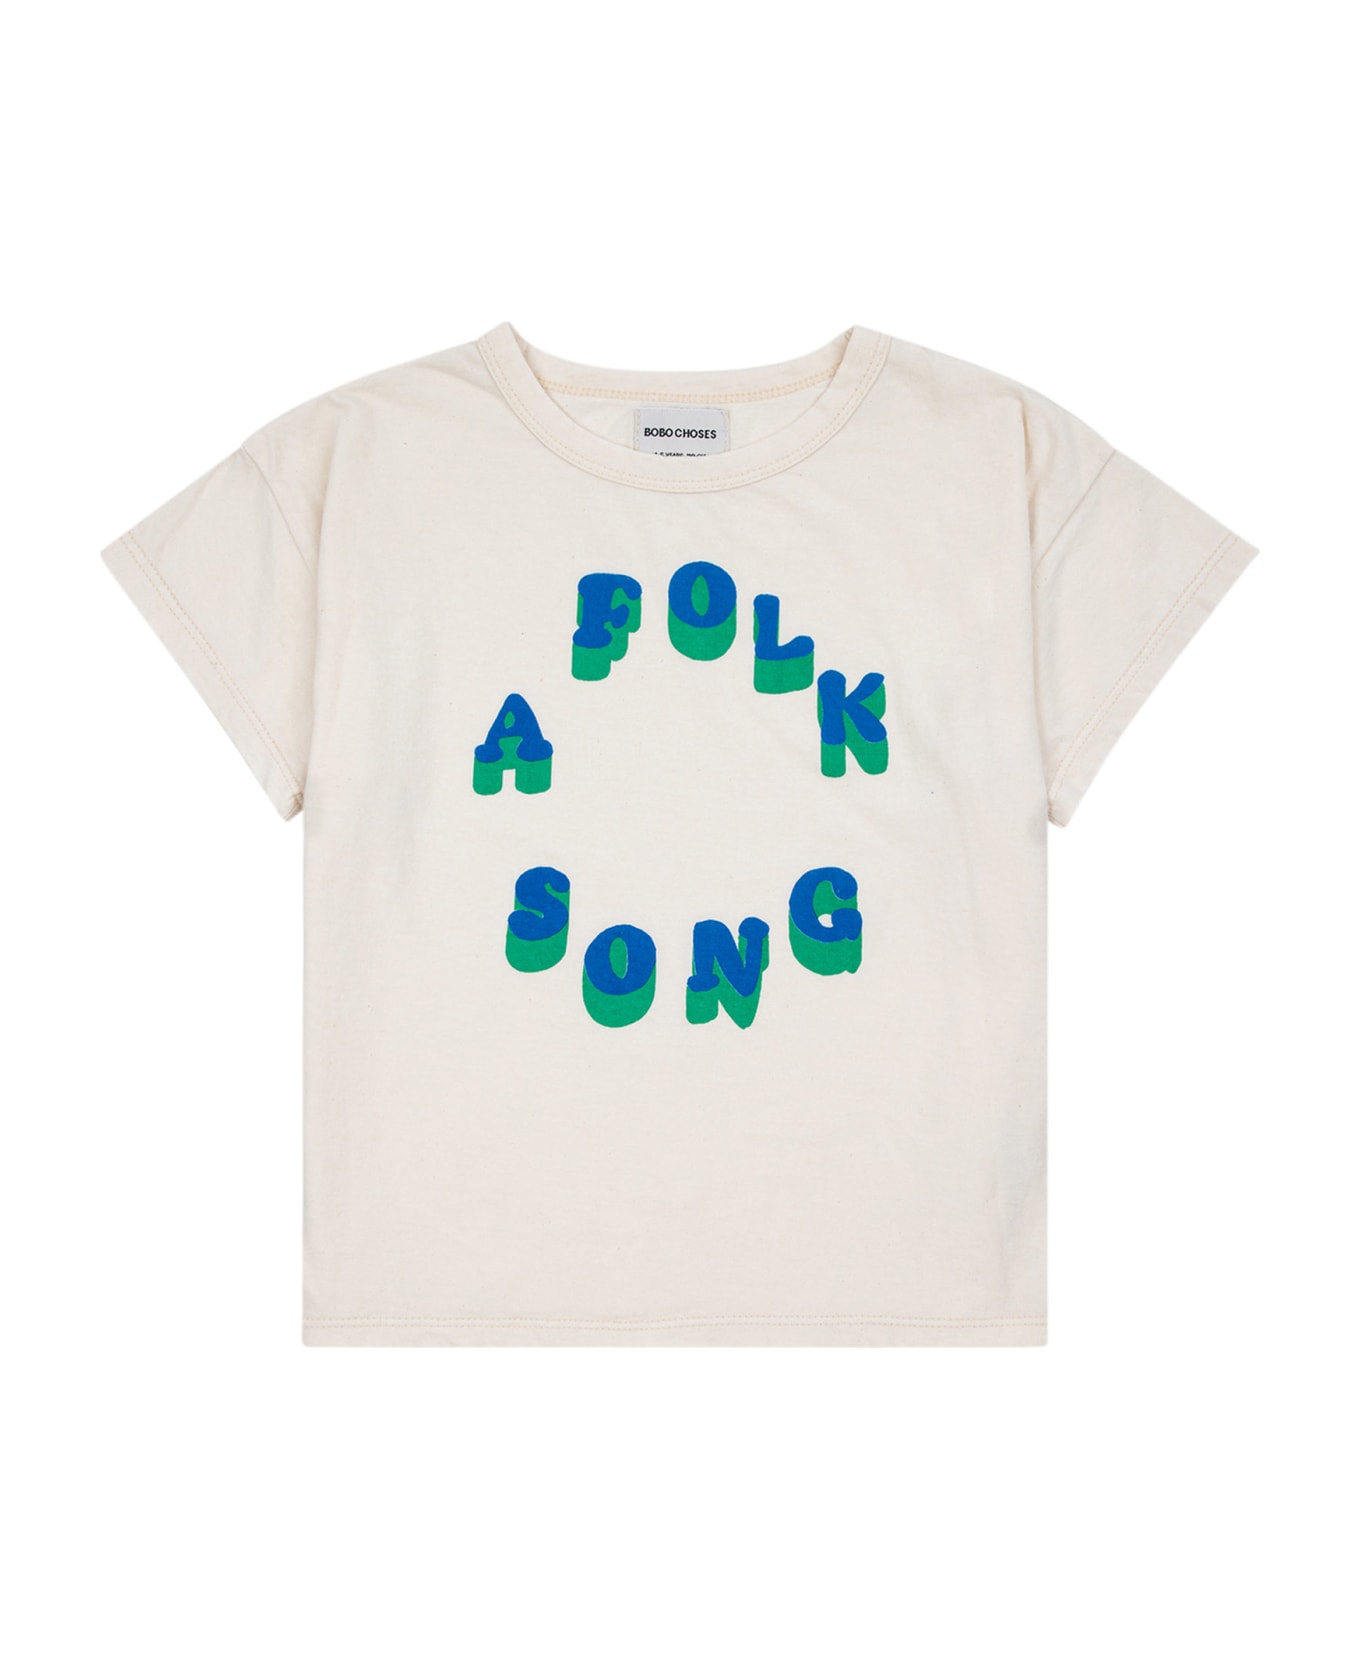 Bobo Choses White T-shirt For Kids With Print - White